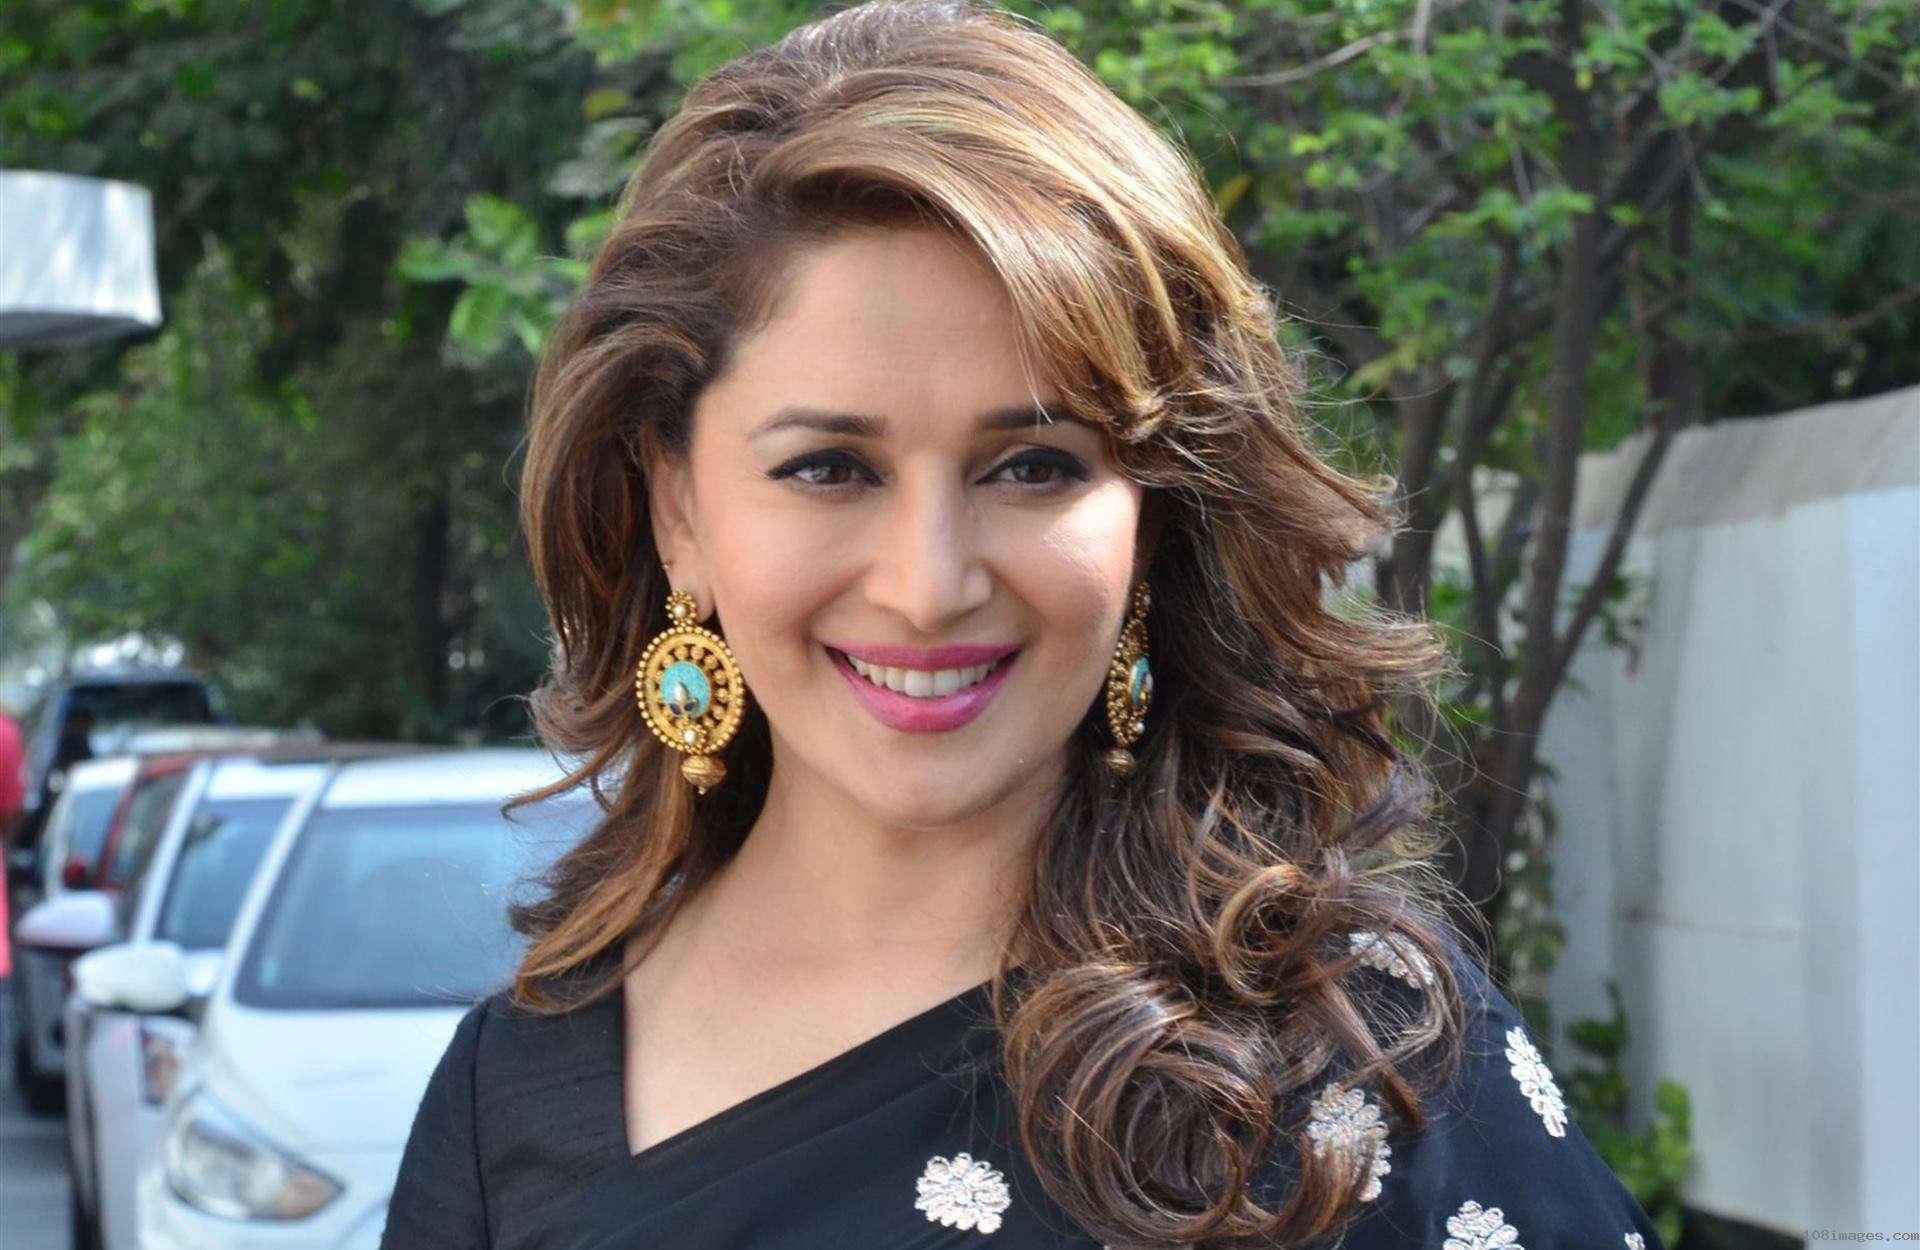 ✓Madhuri Dixit HD Photo, High Resolution, Desktop Wallpaper Android iPhone Mobile